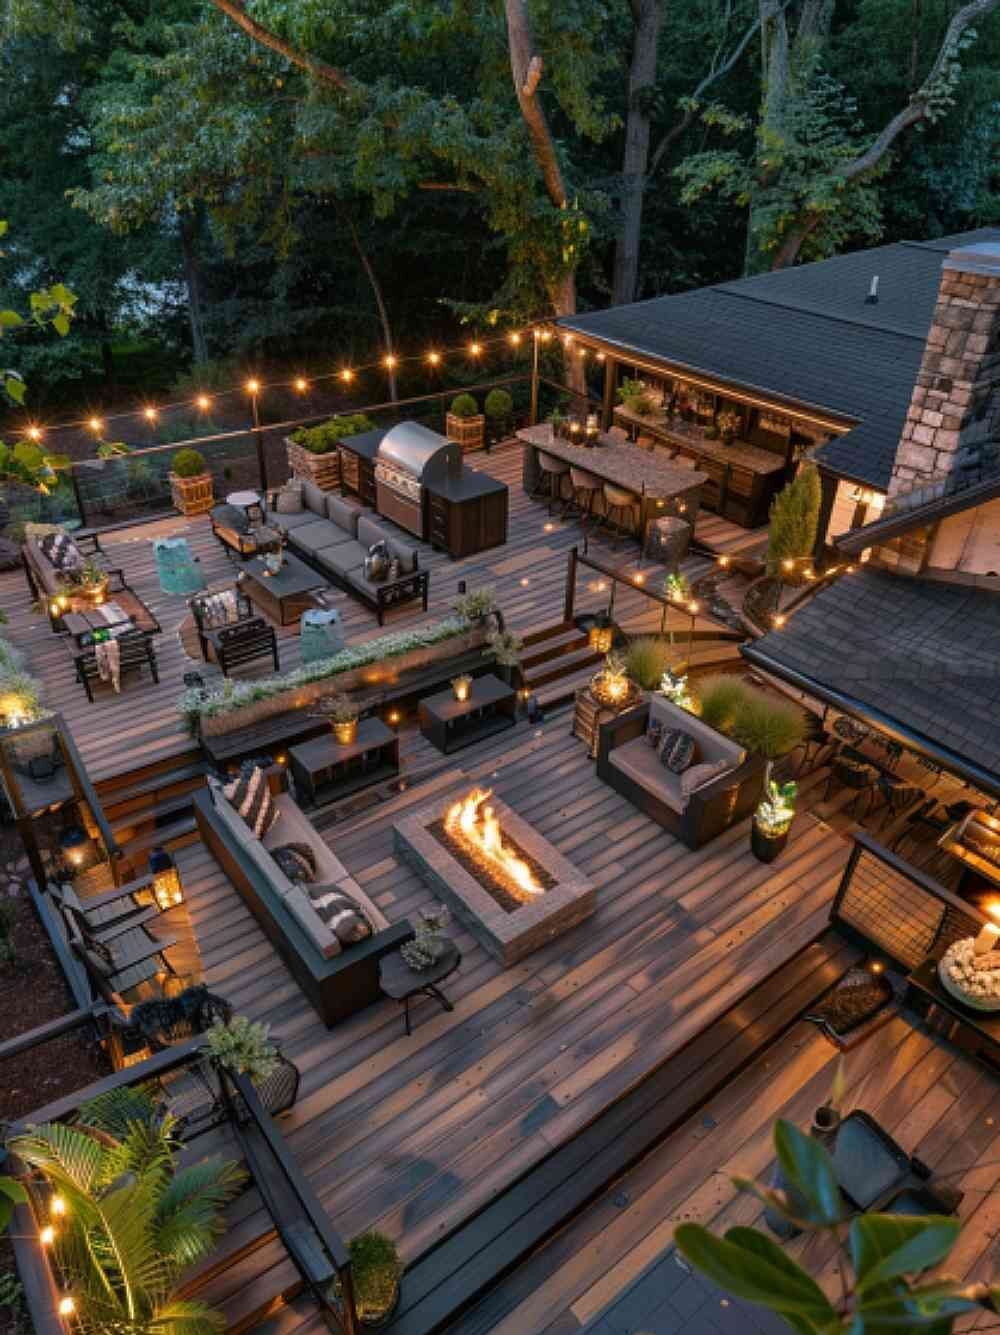 Elevated Deck Design Inspiration: Creating a Stunning Outdoor Living Space